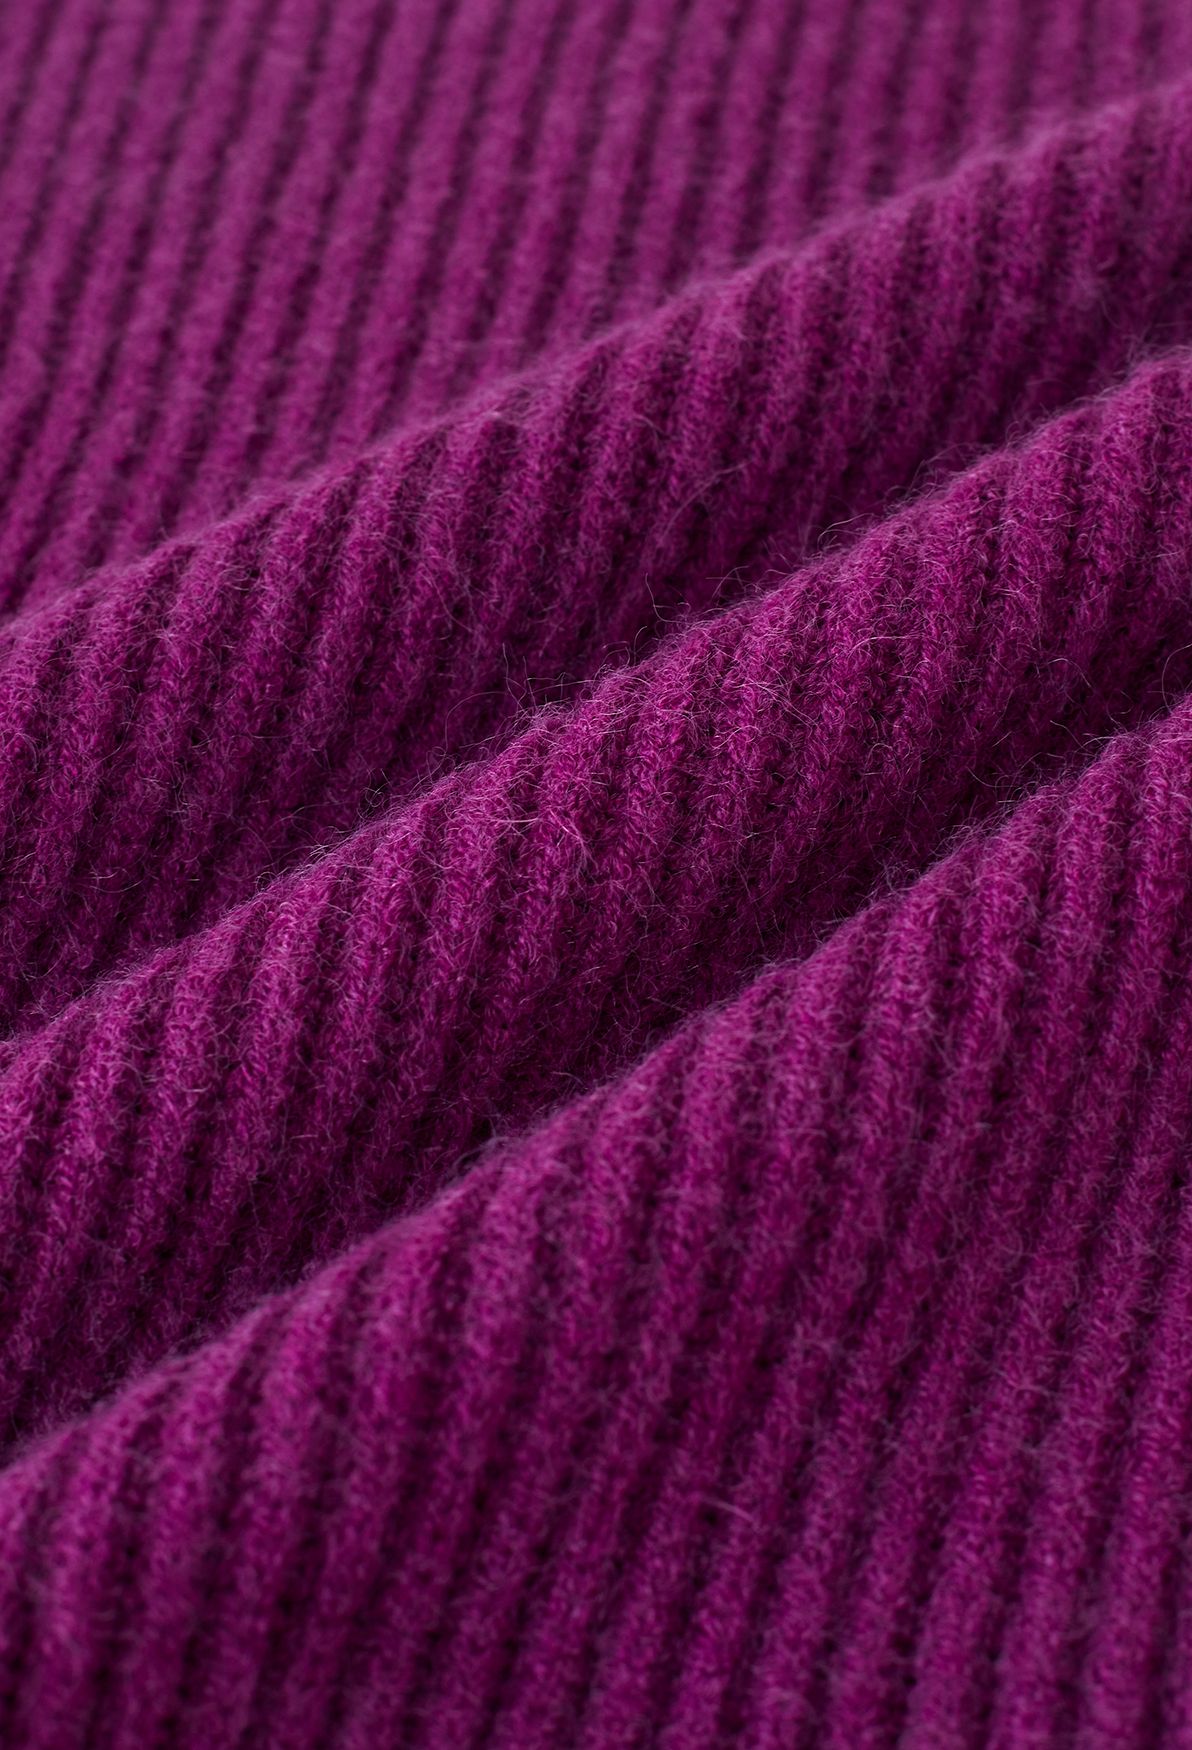 Solid Color Rib Knit Sweater in Purple